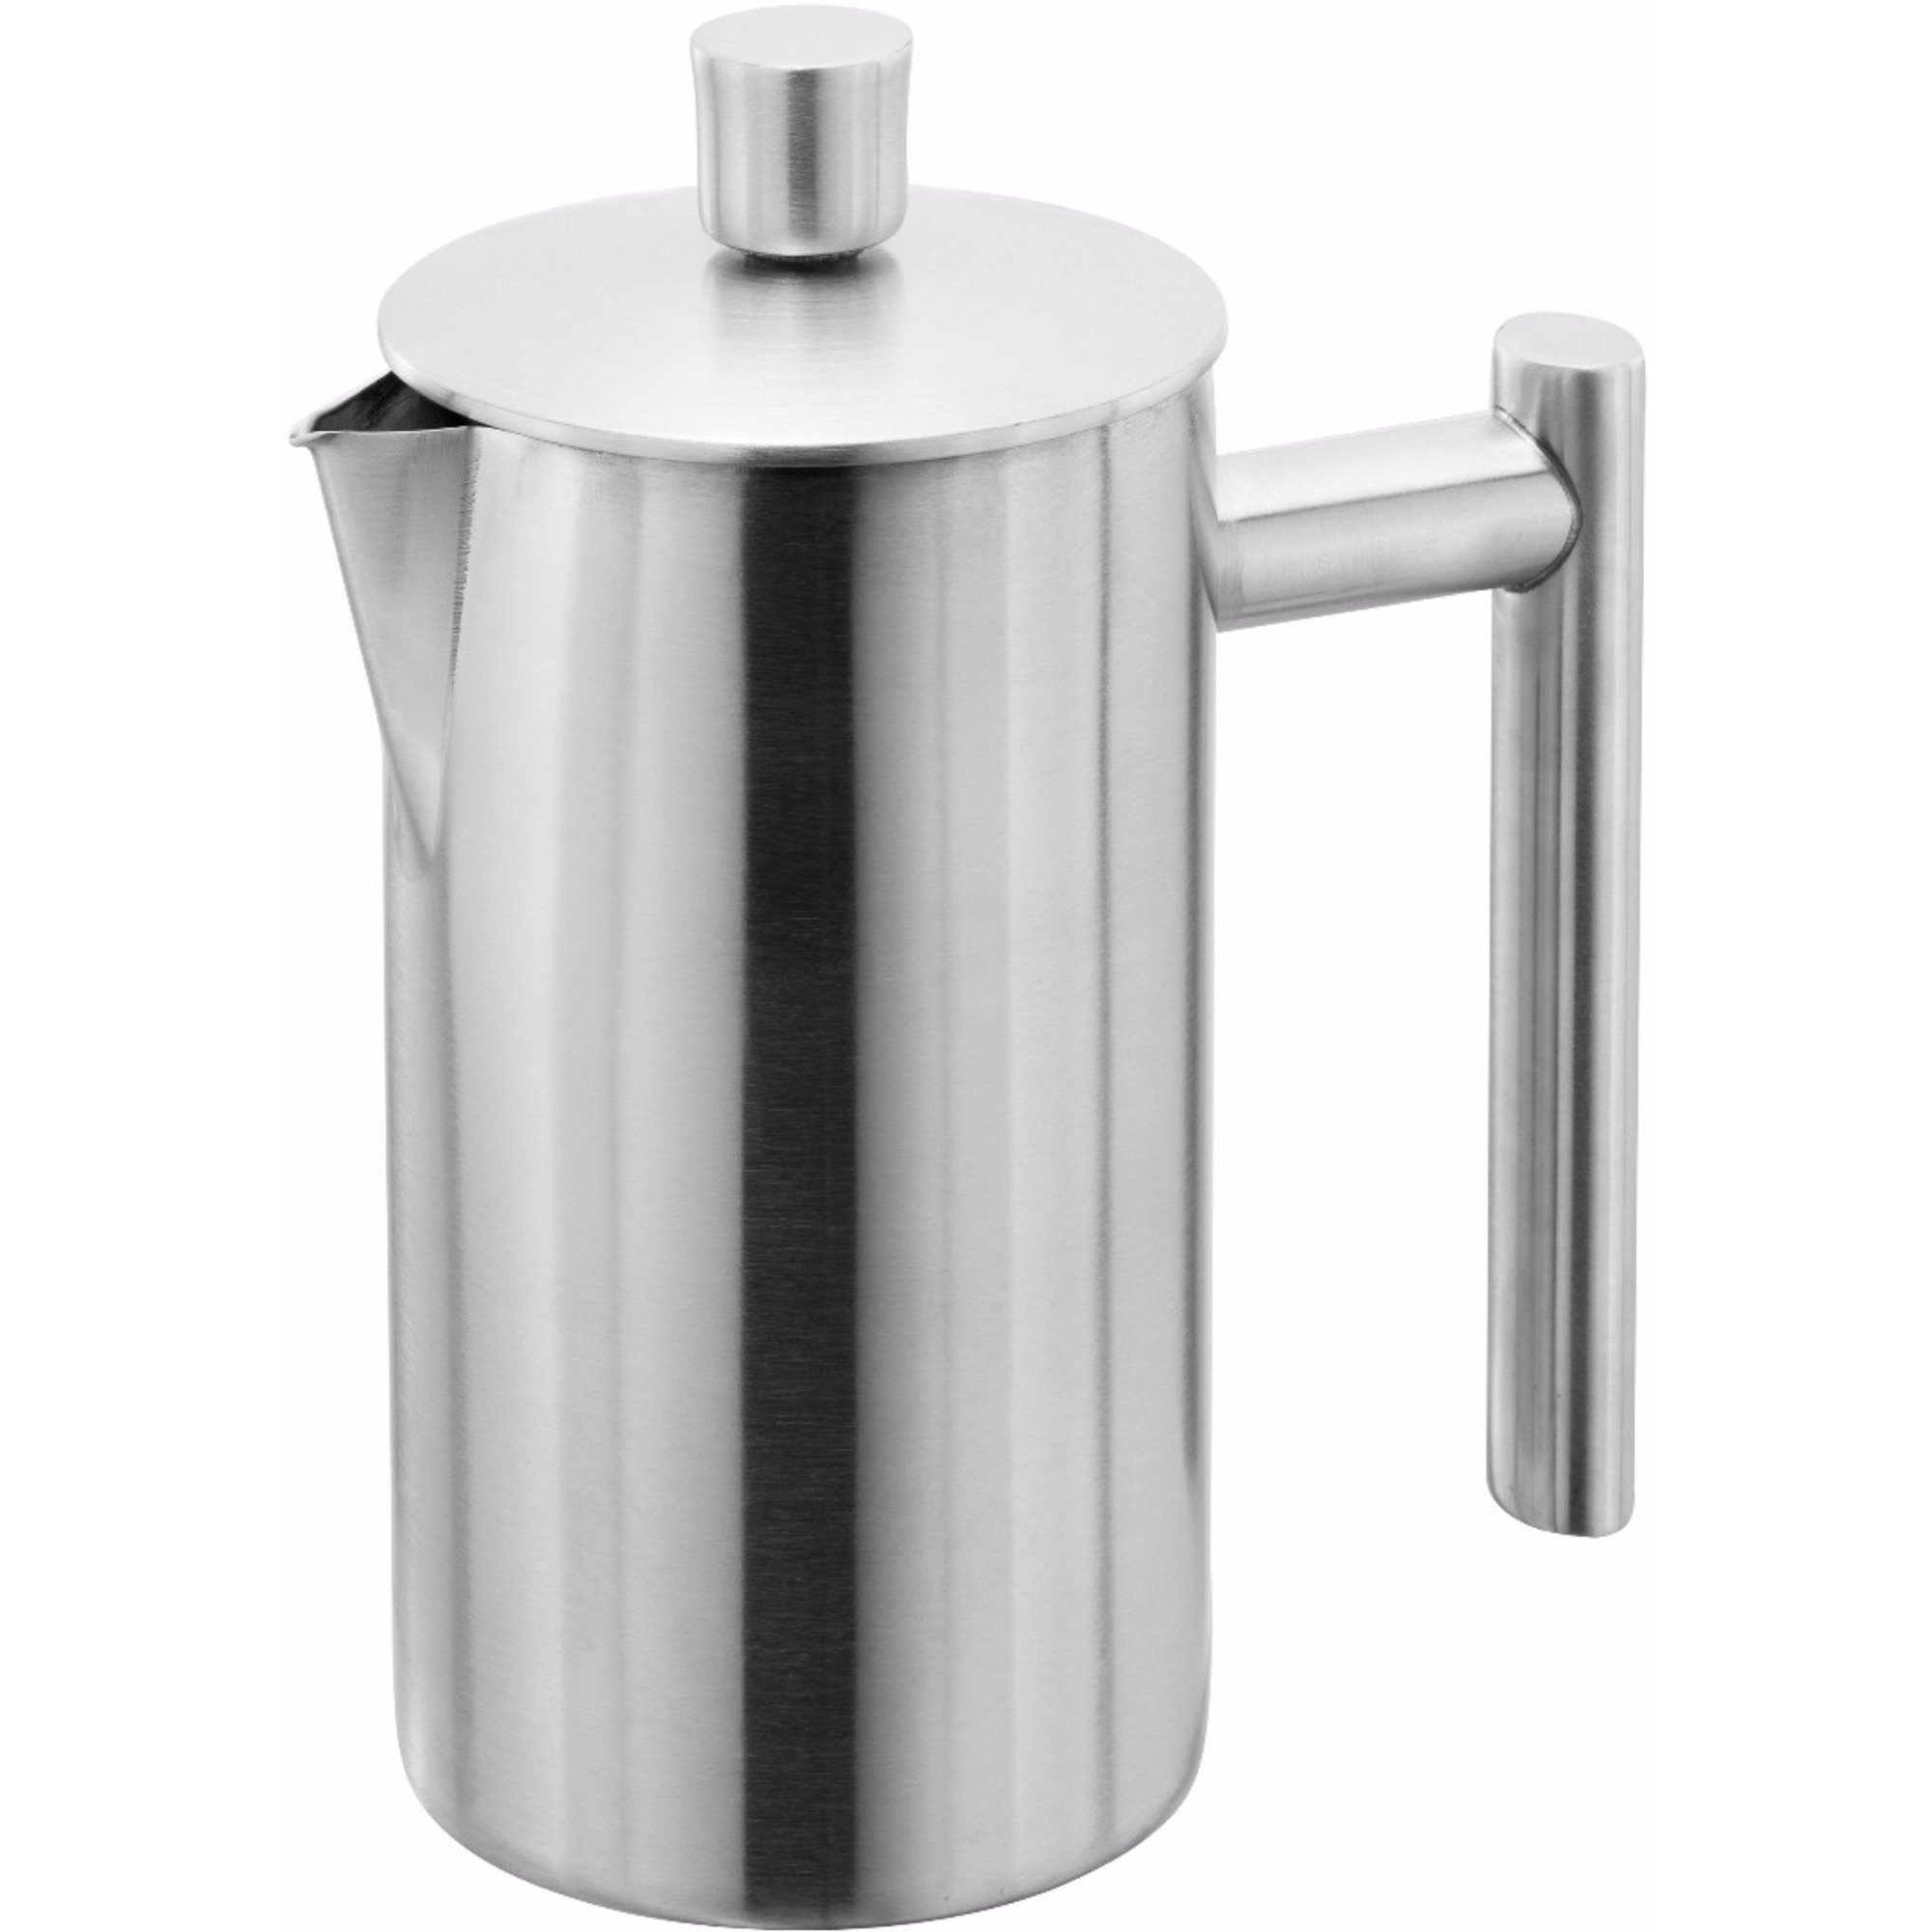 Horwood Cafetiere Doublewall 900ml 8 cup